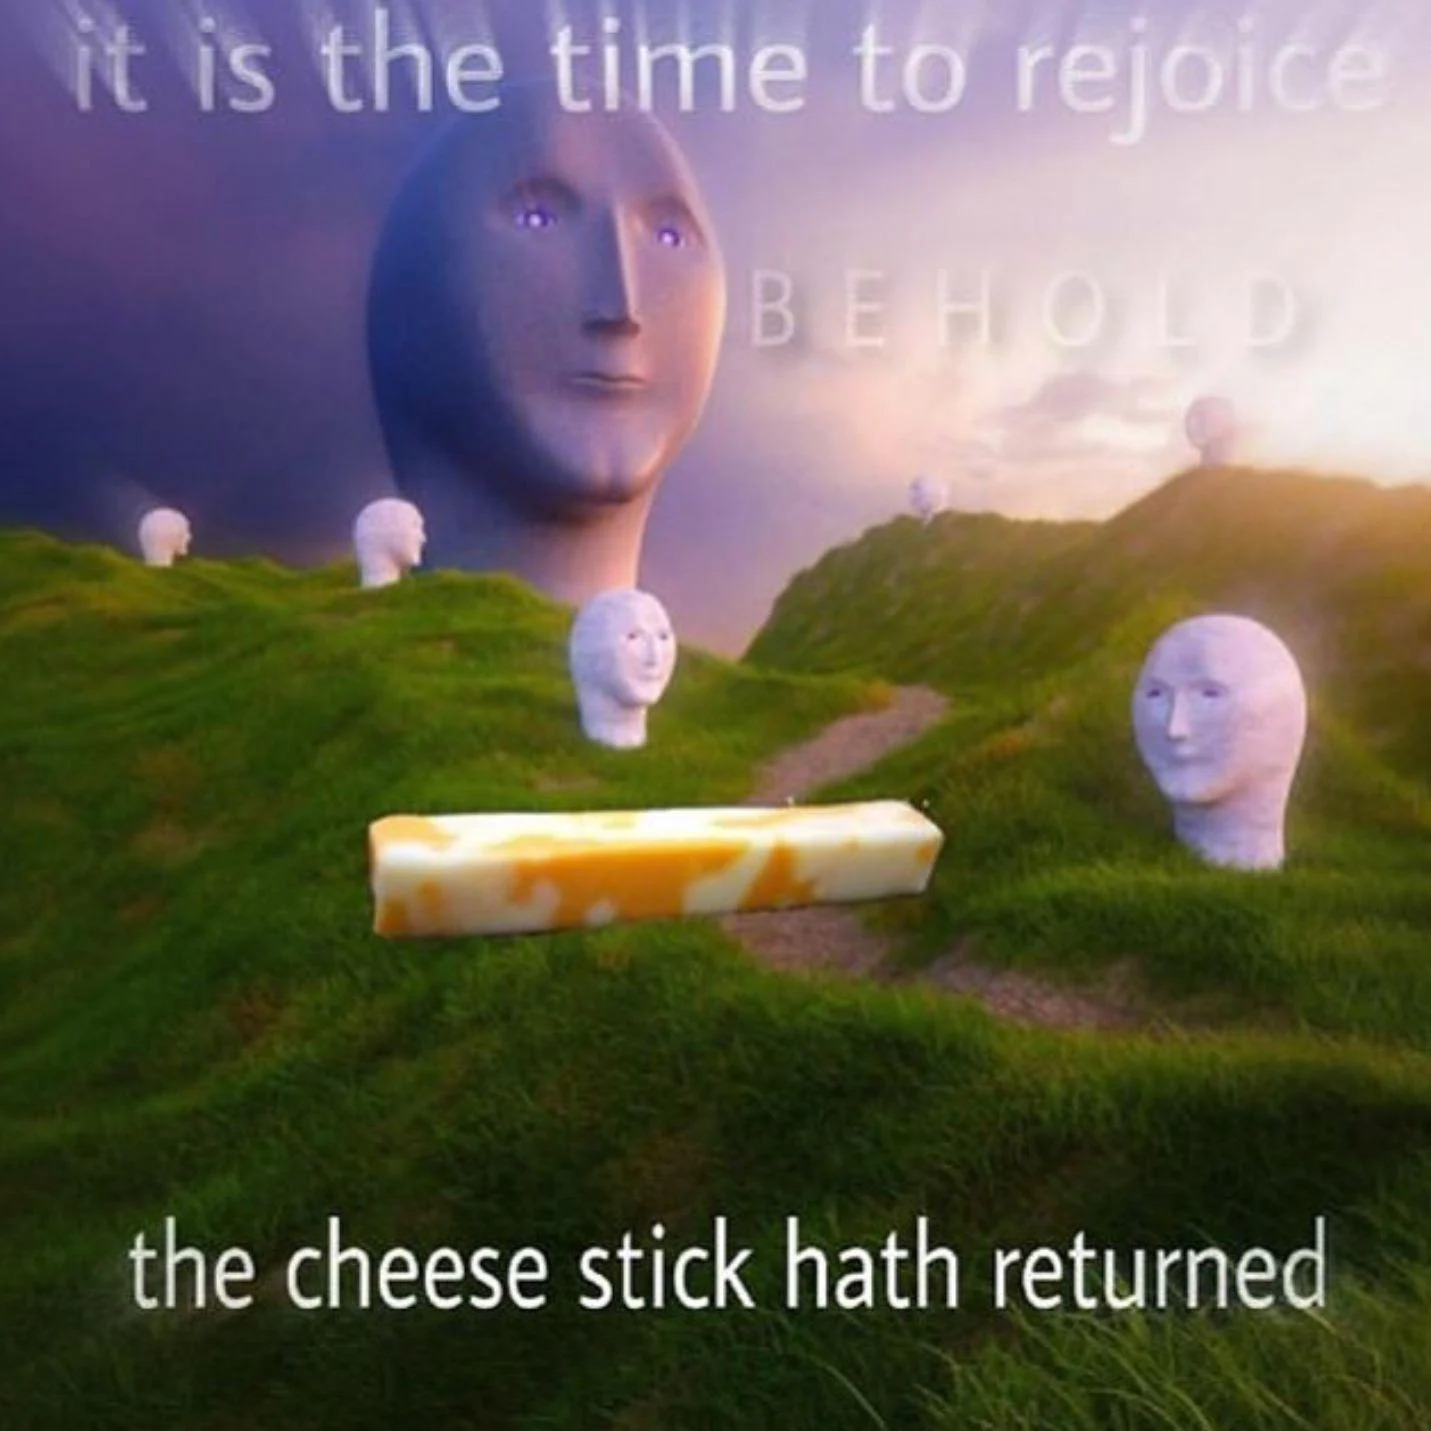 High Quality It is time to rejoice, behold, the cheese stick hath returned Blank Meme Template